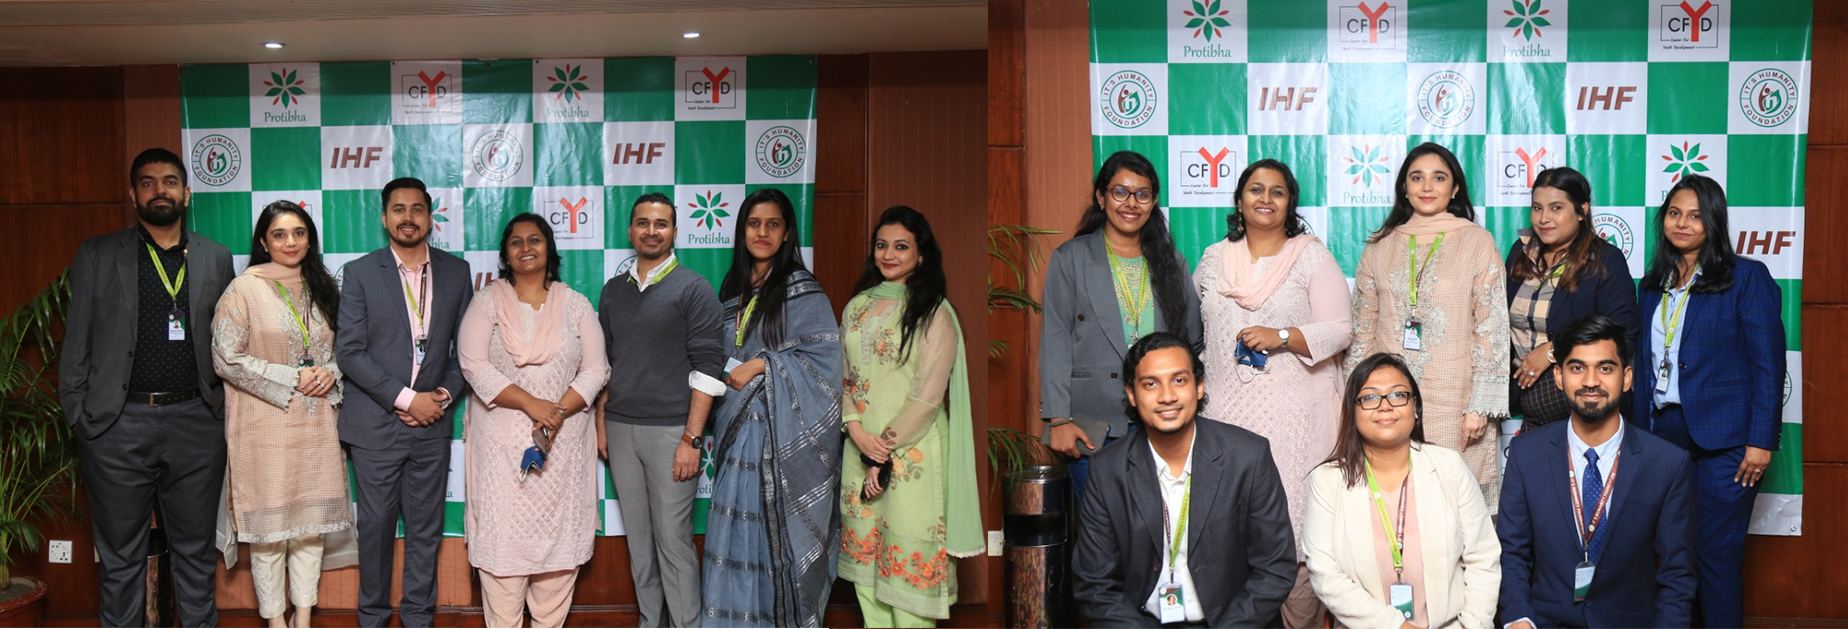 4th Annual General Meeting of IHF